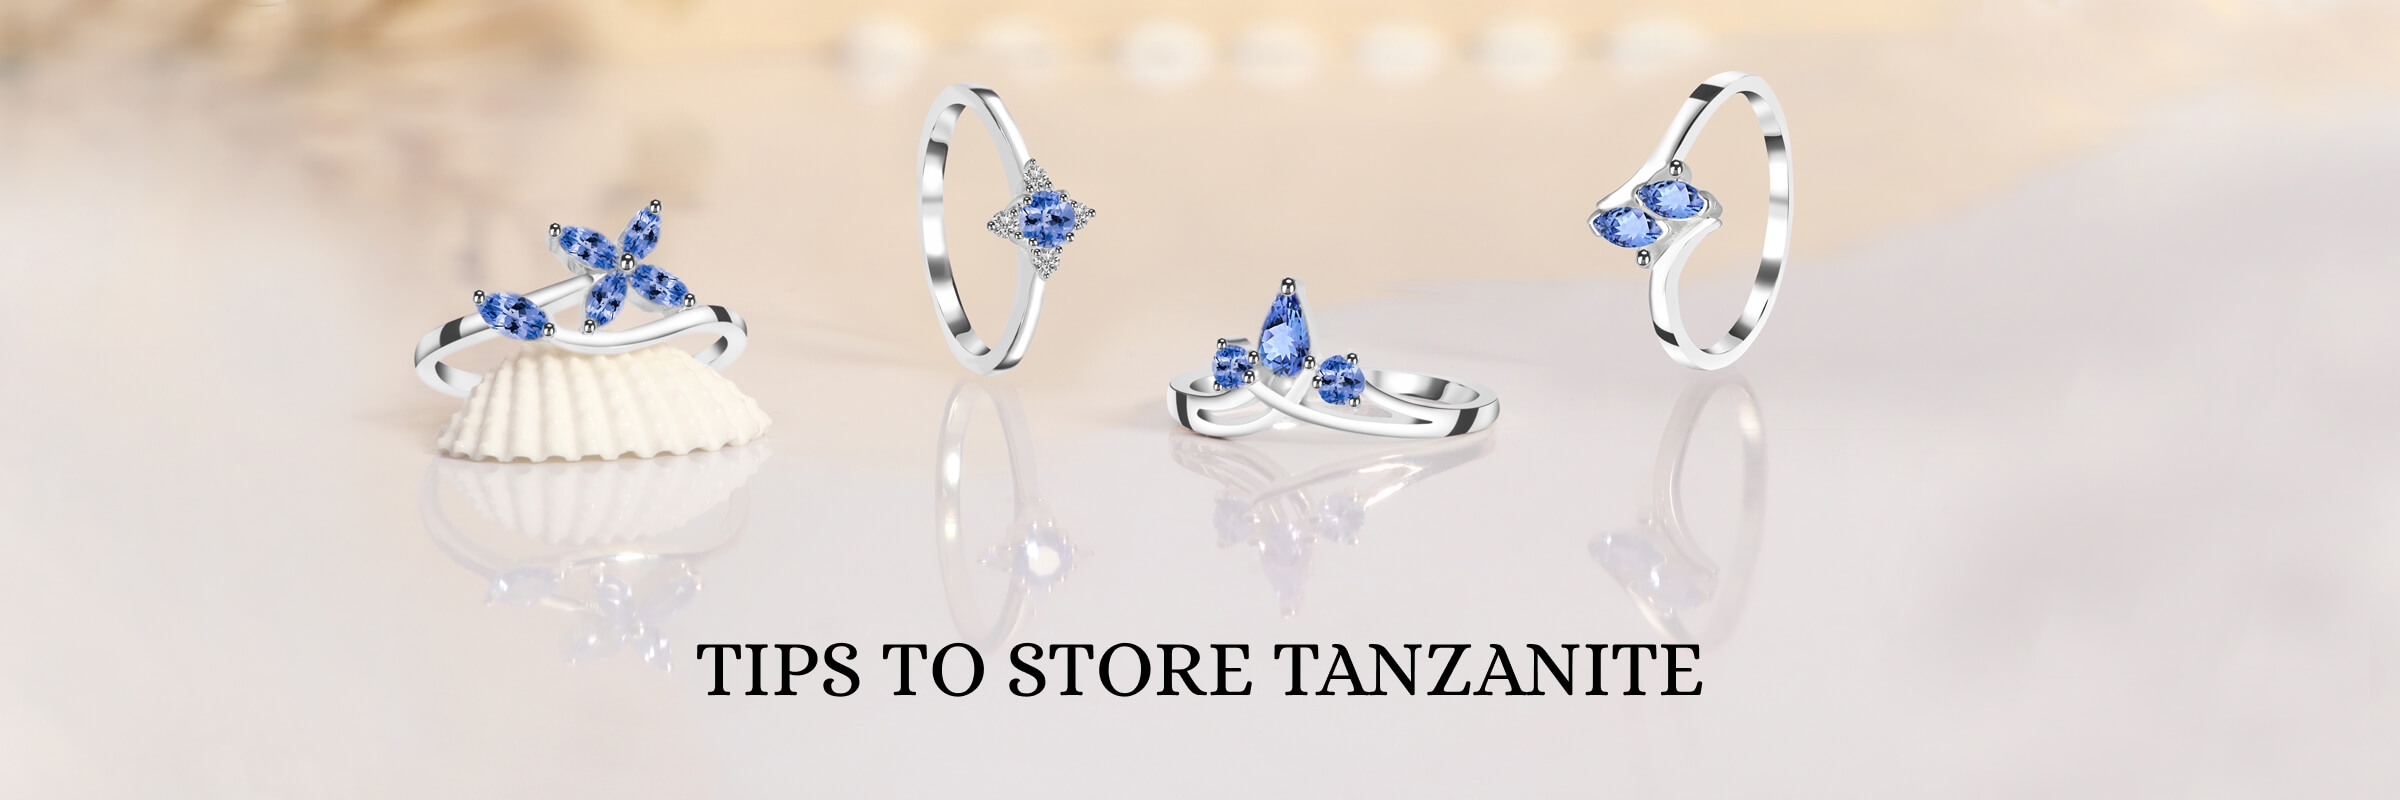 How to Store Your Tanzanite Jewelry